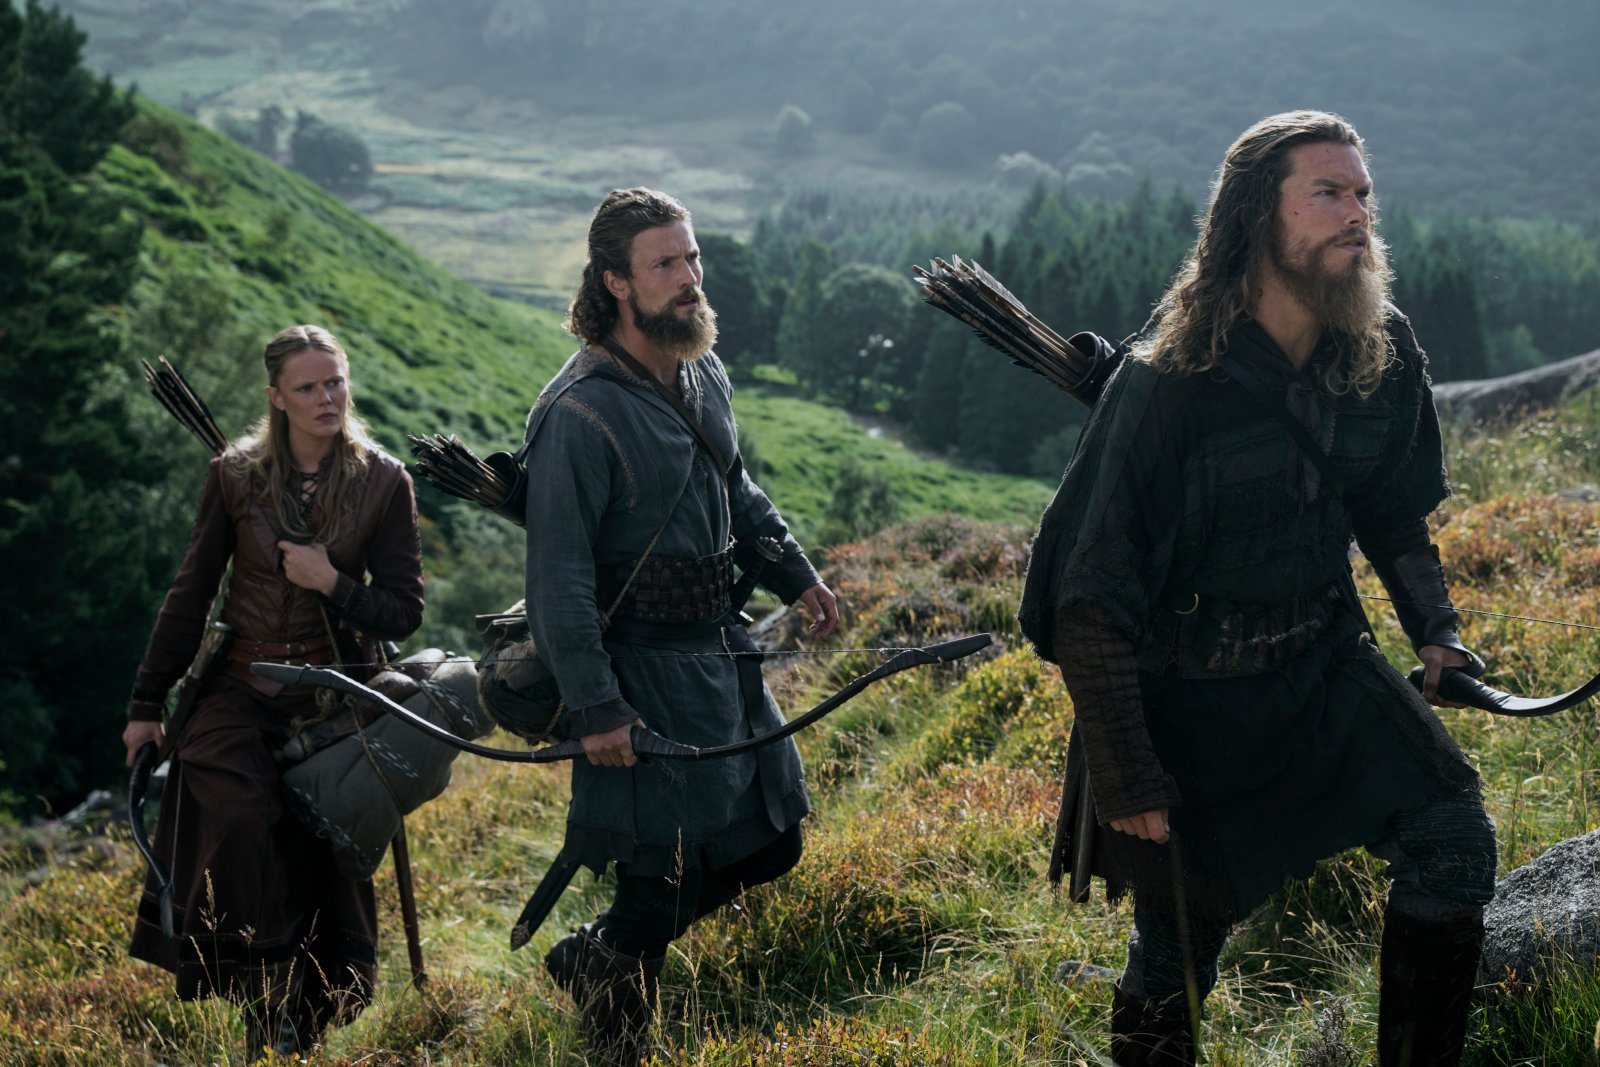 Frida Gustavsson, Leo Suter, Sam Corlett in 'Vikings: Valhalla' Season 2 for our article about its release date. They're walking up a grassy hill.